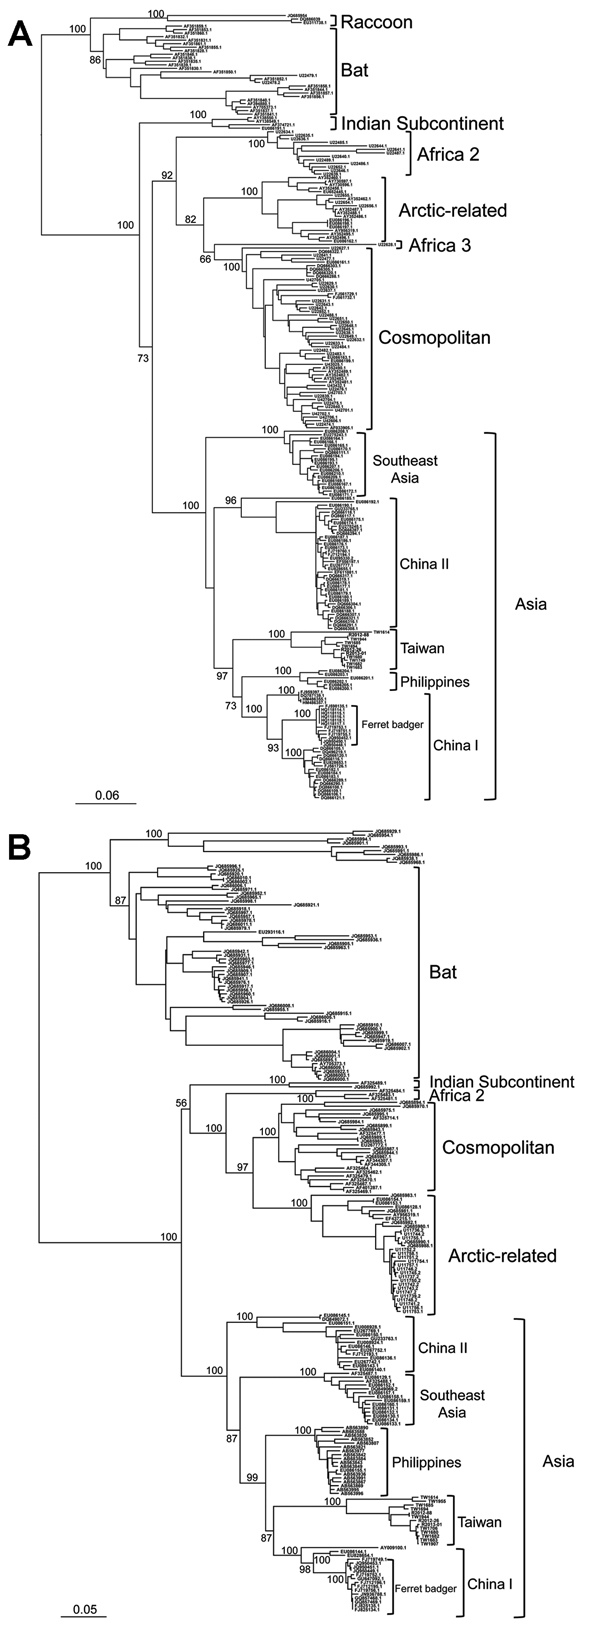 Phylogenetic relationships of major rabies virus groups based on (A) nucleoprotein and (B) glycoprotein gene sequences. The trees were constructed by the maximum-likelihood method based on the general time-reversible nucleotide substitution model. Numbers close to the node are from 100 bootstrap replications. The definition of major clades was based on the work of He et al. (16) and Bourhy et al. (17). Scale bar indicates nucleotide substitutions per site.